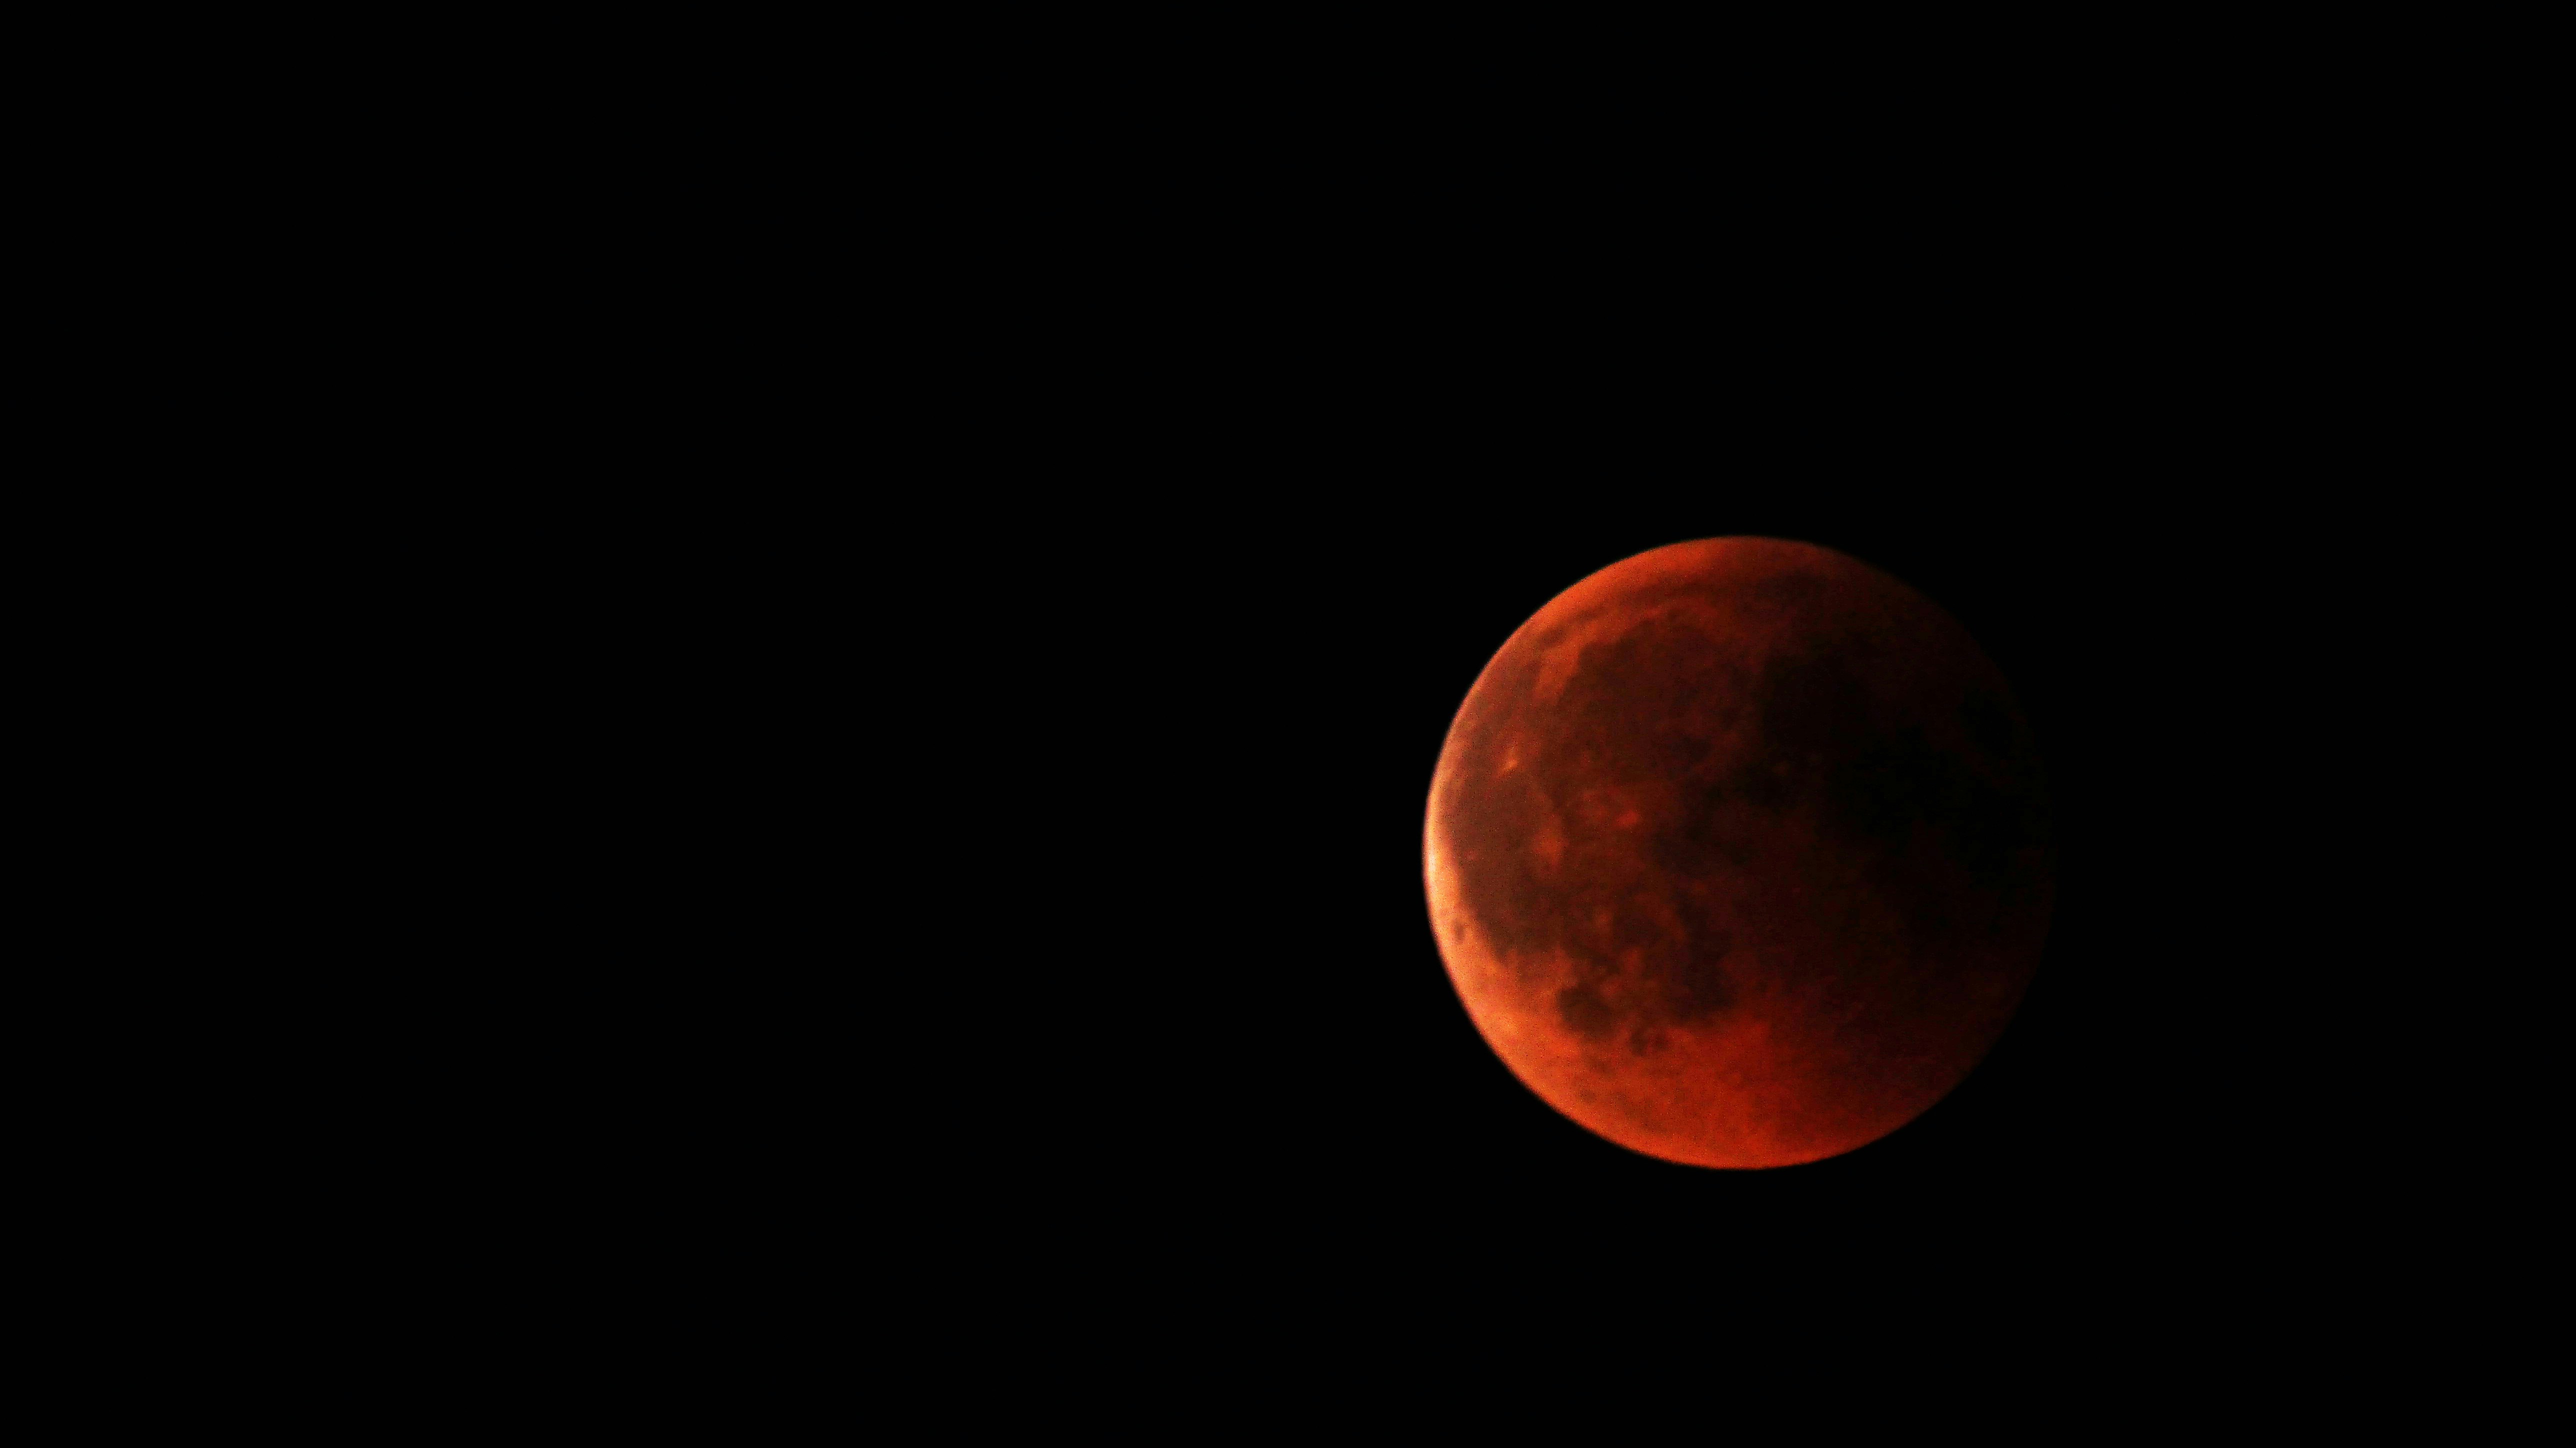 Really struggled with my camera to take the picture. My equipment is definetly not made for capturing such a scene. Though, I am pretty happy with the result.\r
Shot this on Juli 27th 2018 at 23:30 MEST. It was the night with the longest lunar eclipse of the 21st century at my location. At the same time the Mars was really near the Earth and appeared as bright orange/red “star” just a little bit beneath the Moon. What a great night. Happy to was there, happy to be able to watch this spectacular phenomenon.